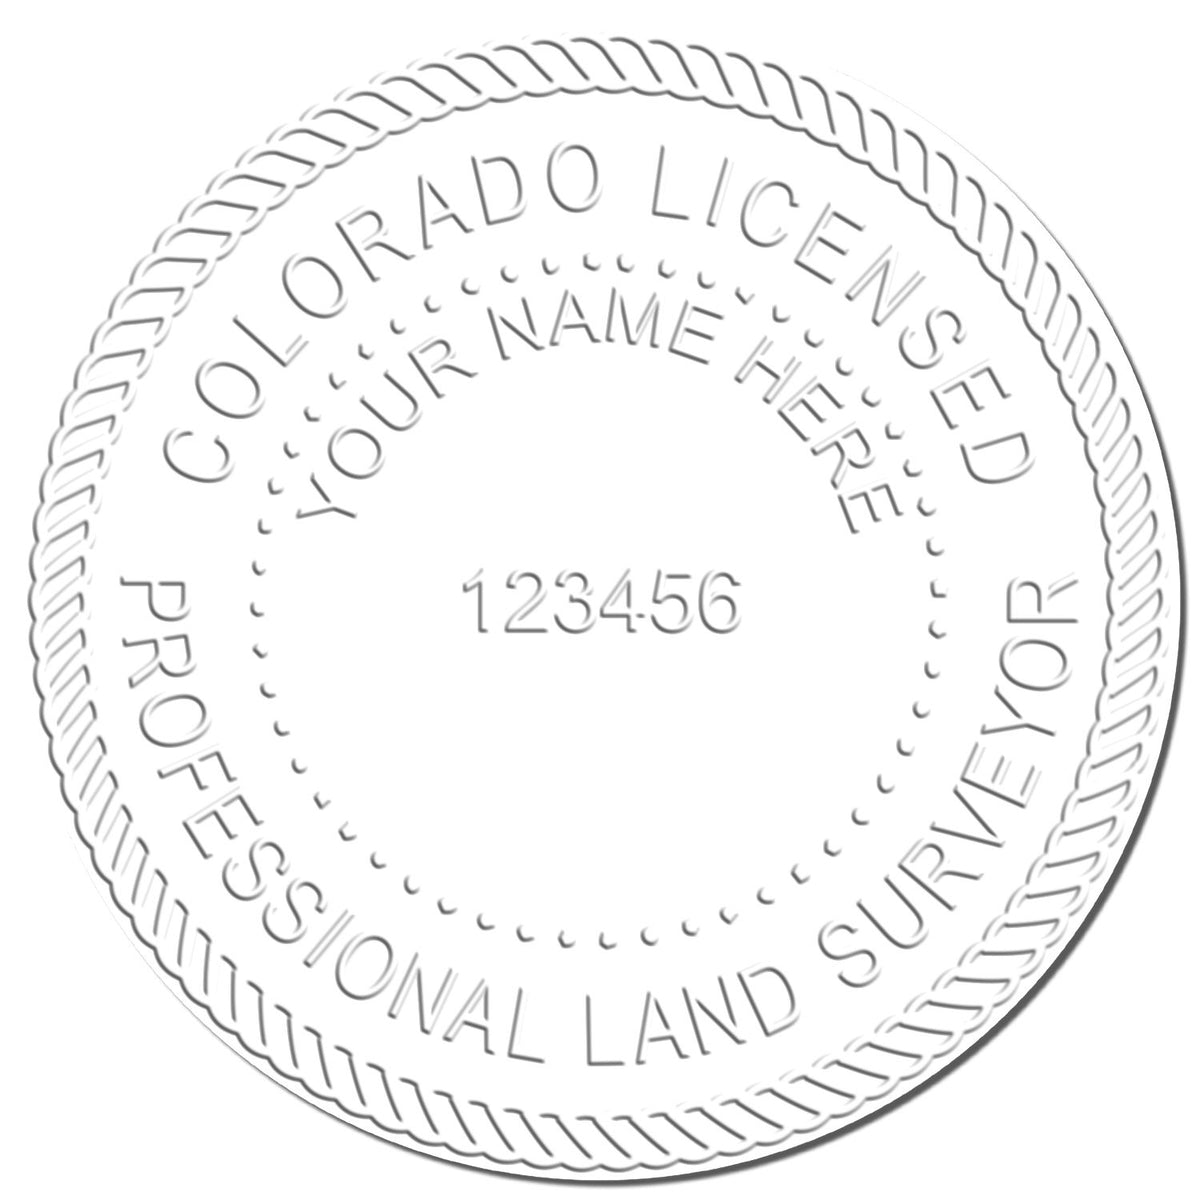 This paper is stamped with a sample imprint of the Hybrid Colorado Land Surveyor Seal, signifying its quality and reliability.